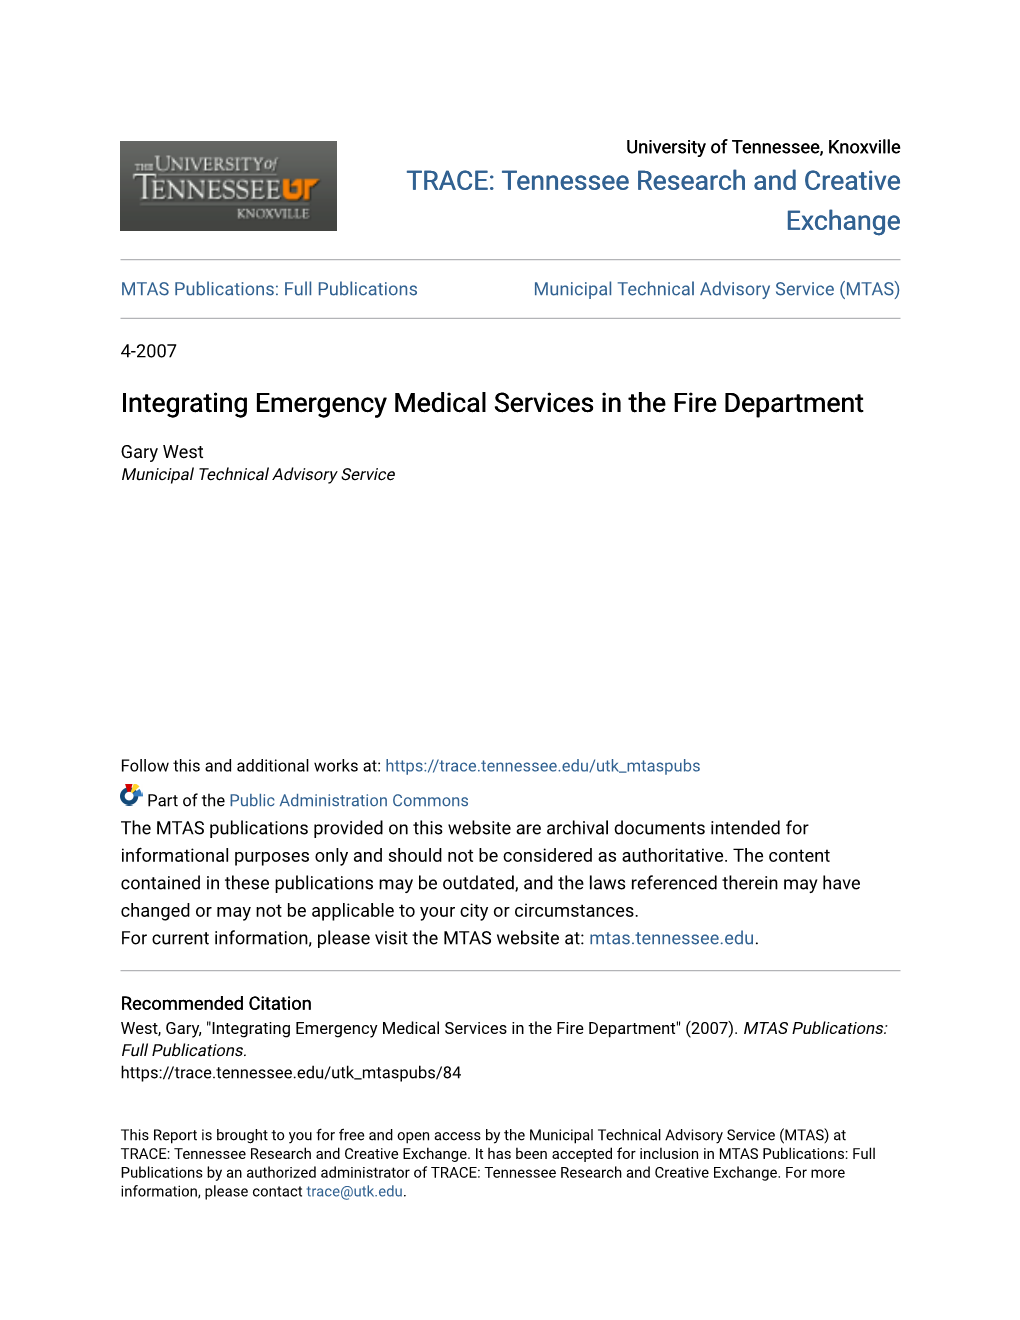 Integrating Emergency Medical Services in the Fire Department